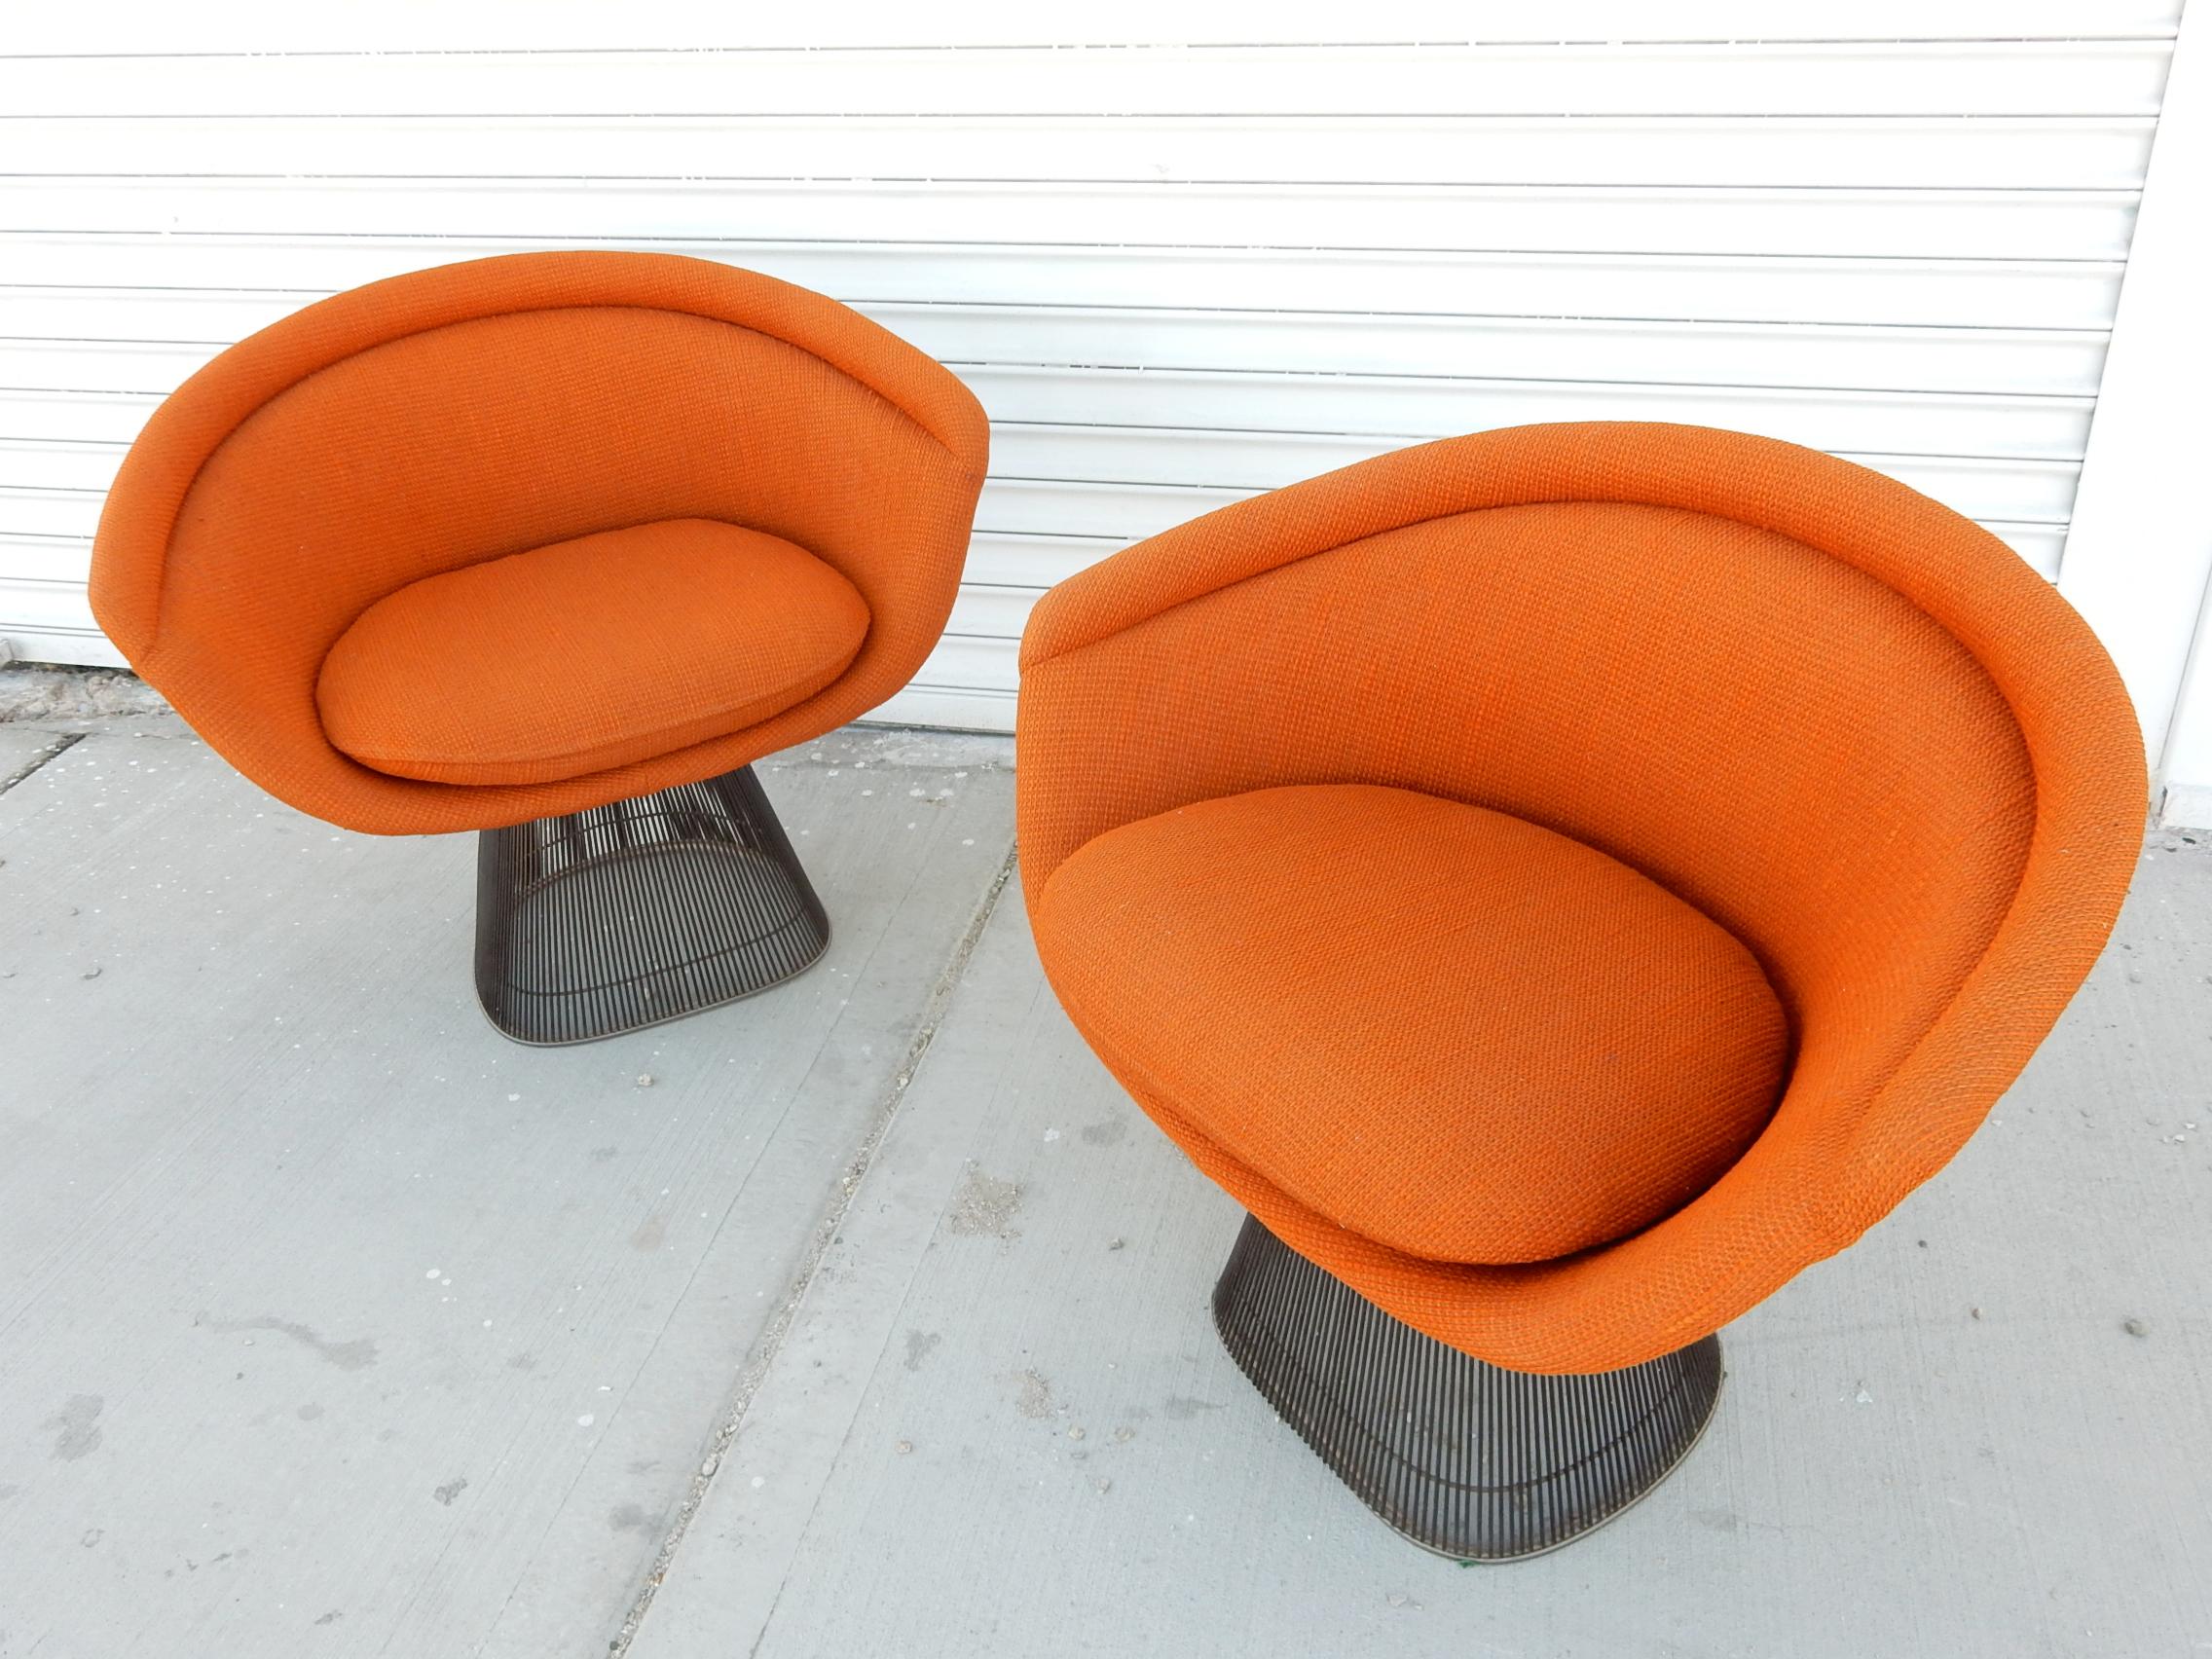 Extraordinary pair of the iconic wire lounge chair designed by Warren Platner for Knoll International., dated 1978.
Original Knoll orange upholstery on anodized black wire frames. Both labelled under seat cushion.
These chairs are clean and show